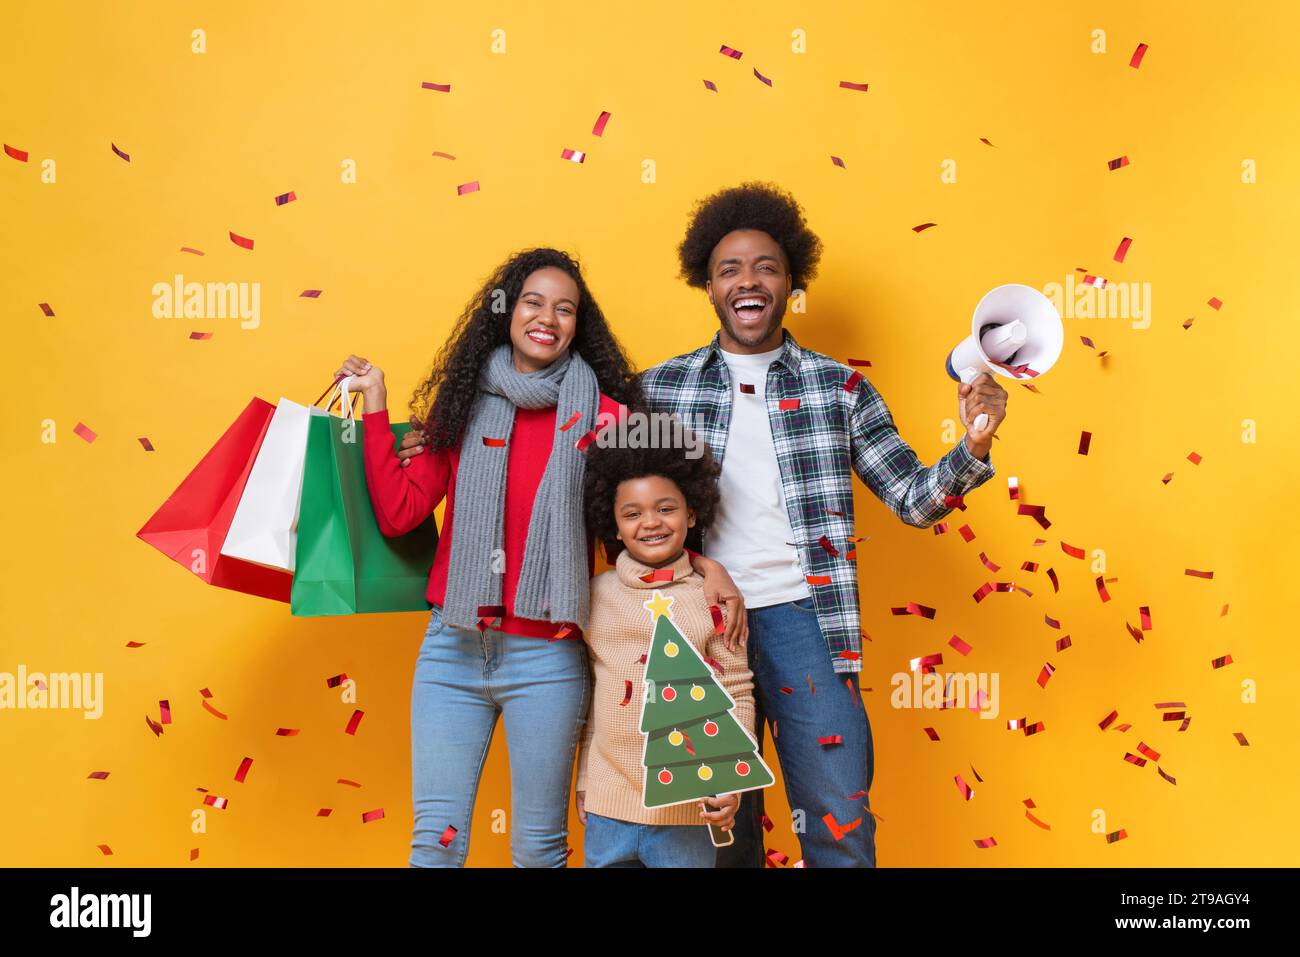 Happy African American family in festive Christmas celebration studio shot yellow color background with confetti Stock Photo